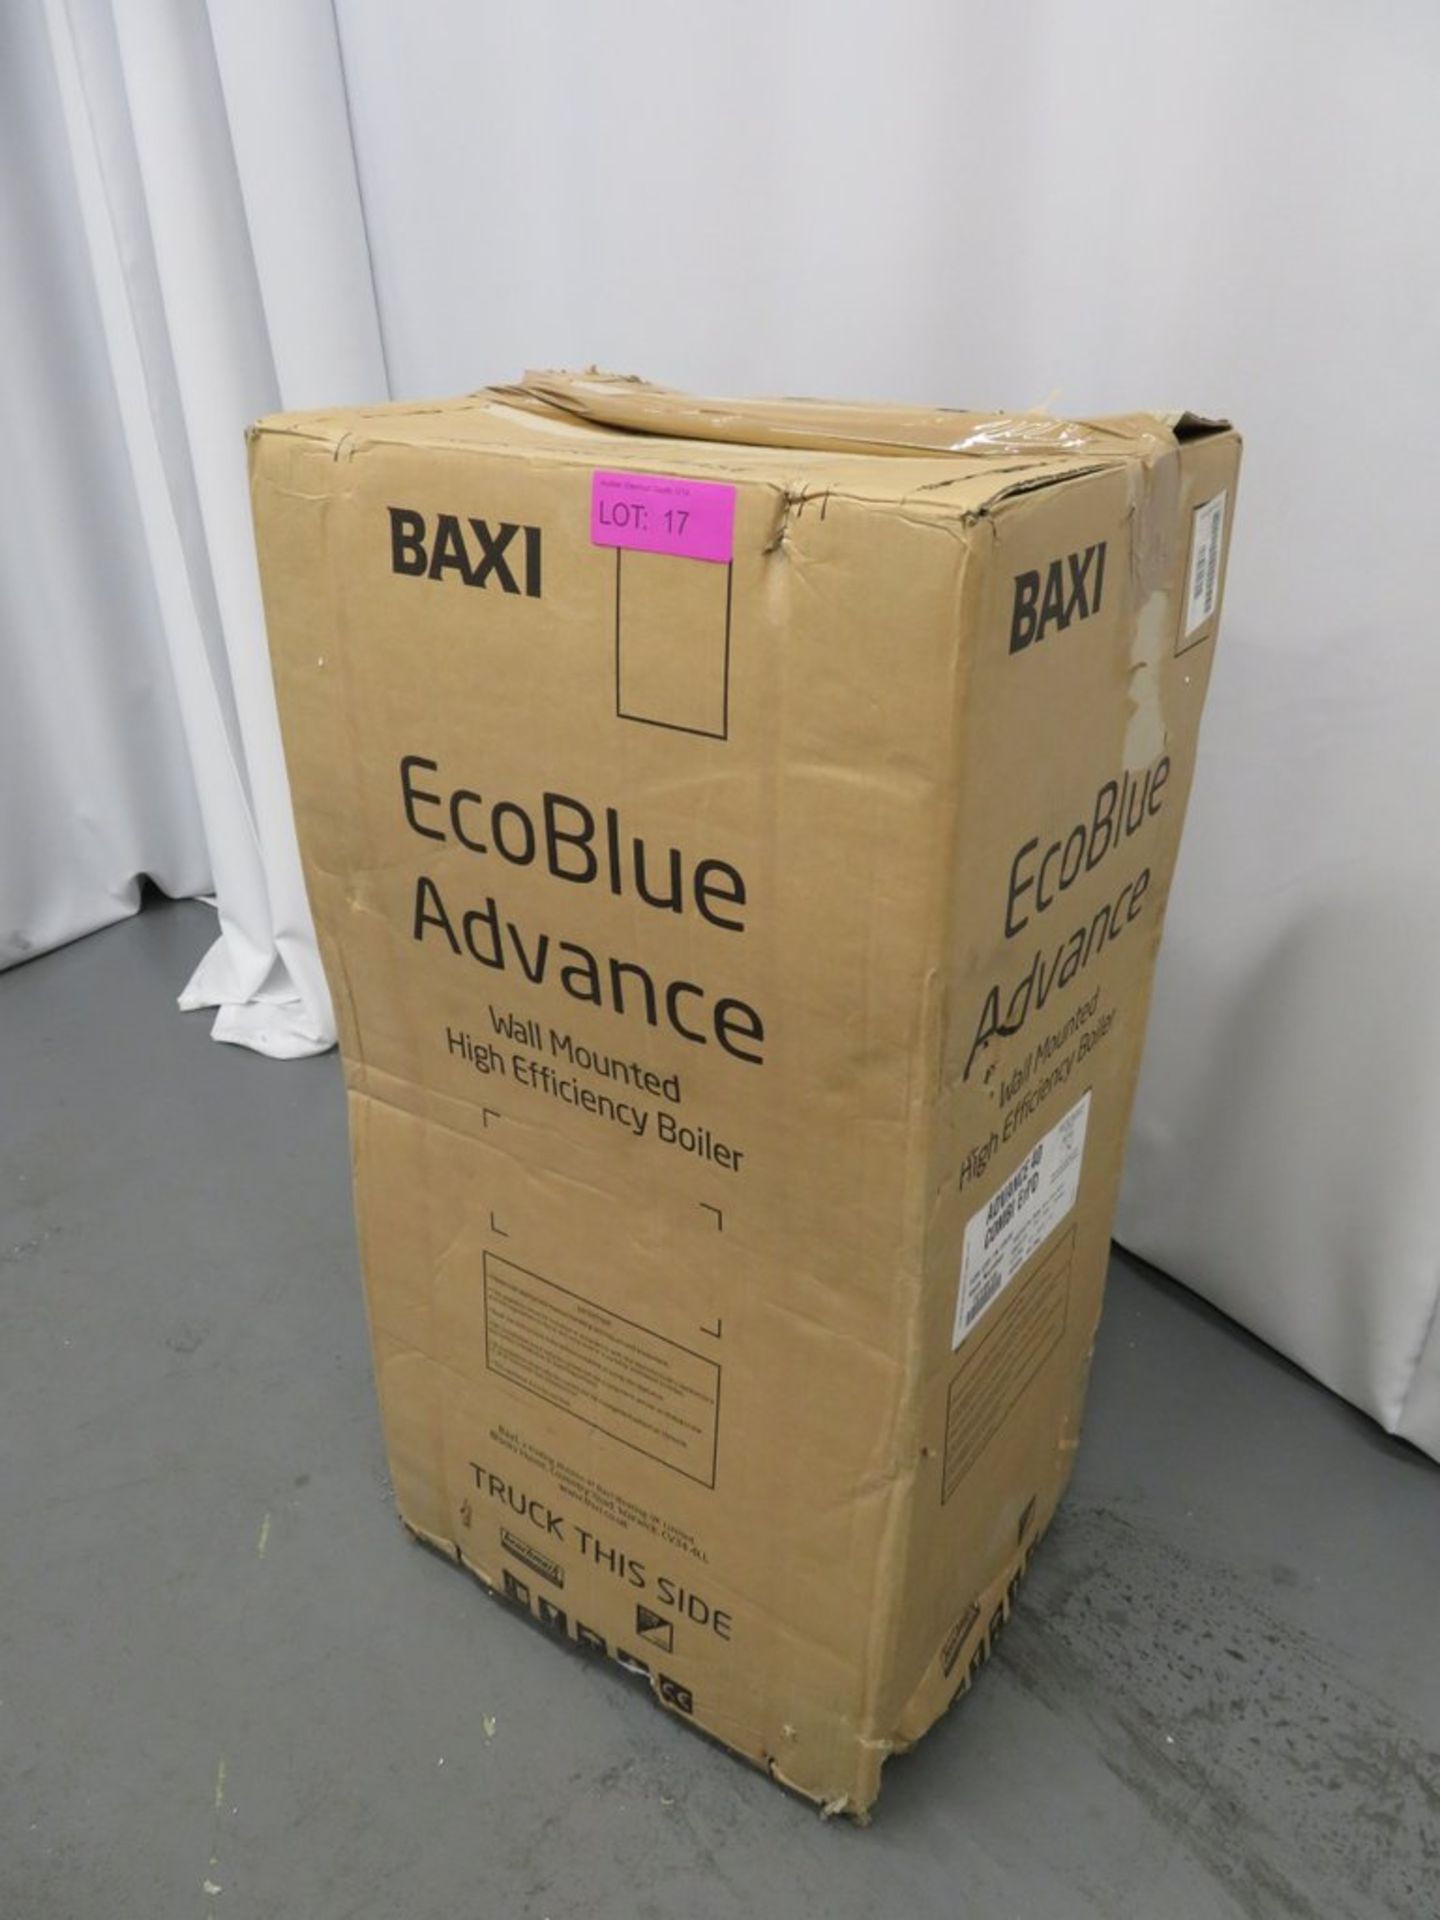 Baxi 40kw Eco Blue Advance Wall Mounted High Efficiency Boiler. Model: Advance 40 Combi. - Image 13 of 19